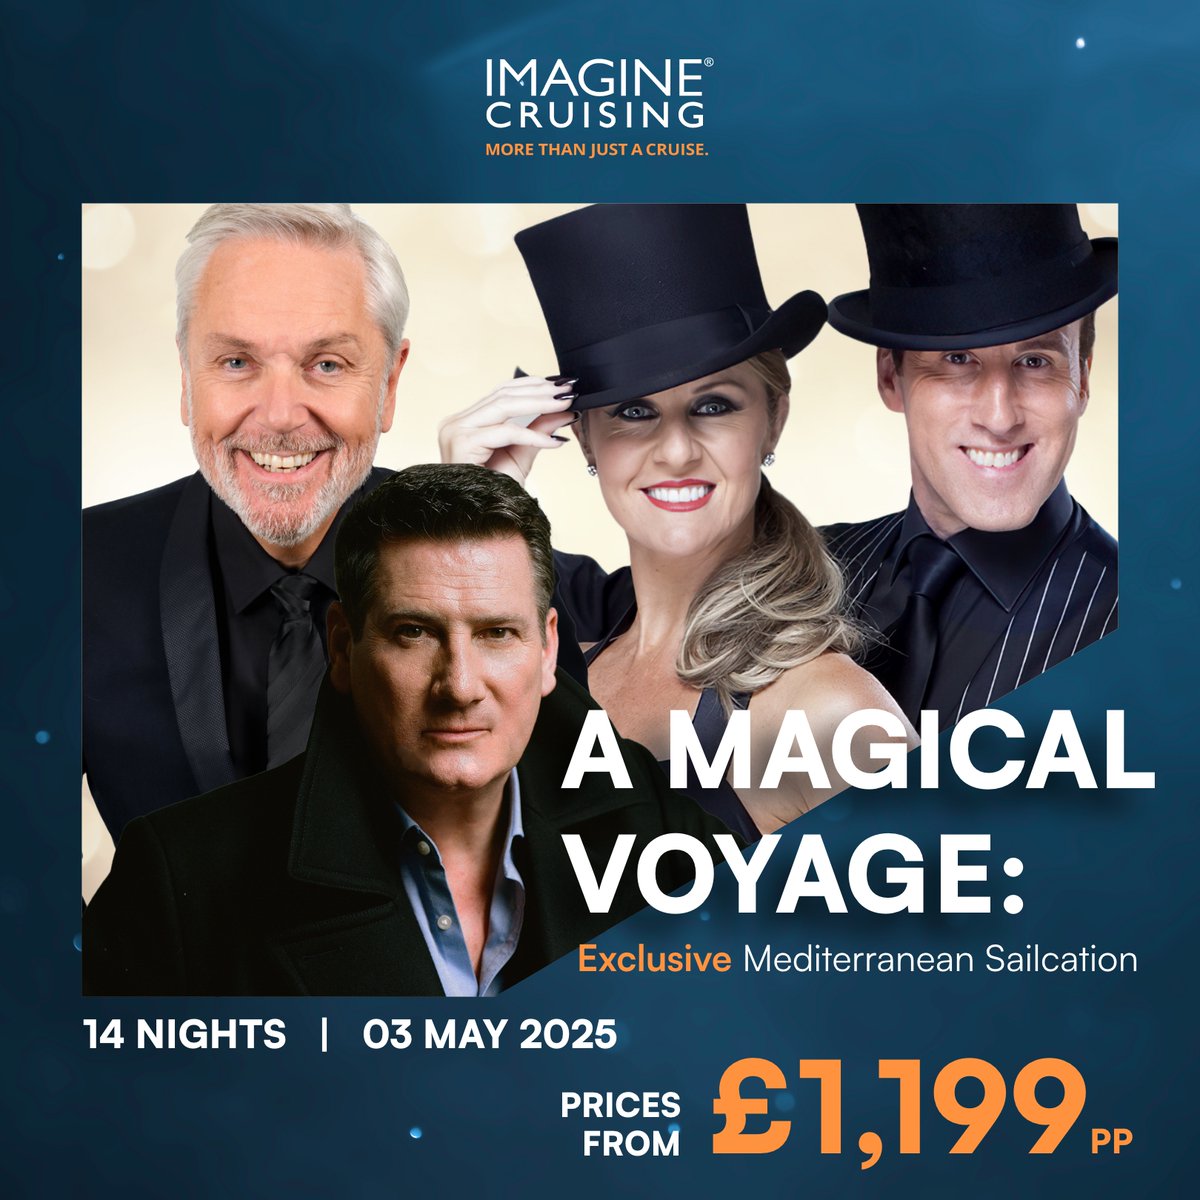 Join me, fellow ballroom superstar @ErinBoag, 80s icon @TheTonyHadley & legendary performer @RealBrianConley on @imaginecruising’s exclusive no-fly Mediterranean Sailcation, May 2025🛳☀️

Call 01793856932 or click here for details: bit.ly/AntonSailTweet

#ImagineSailcation #AD